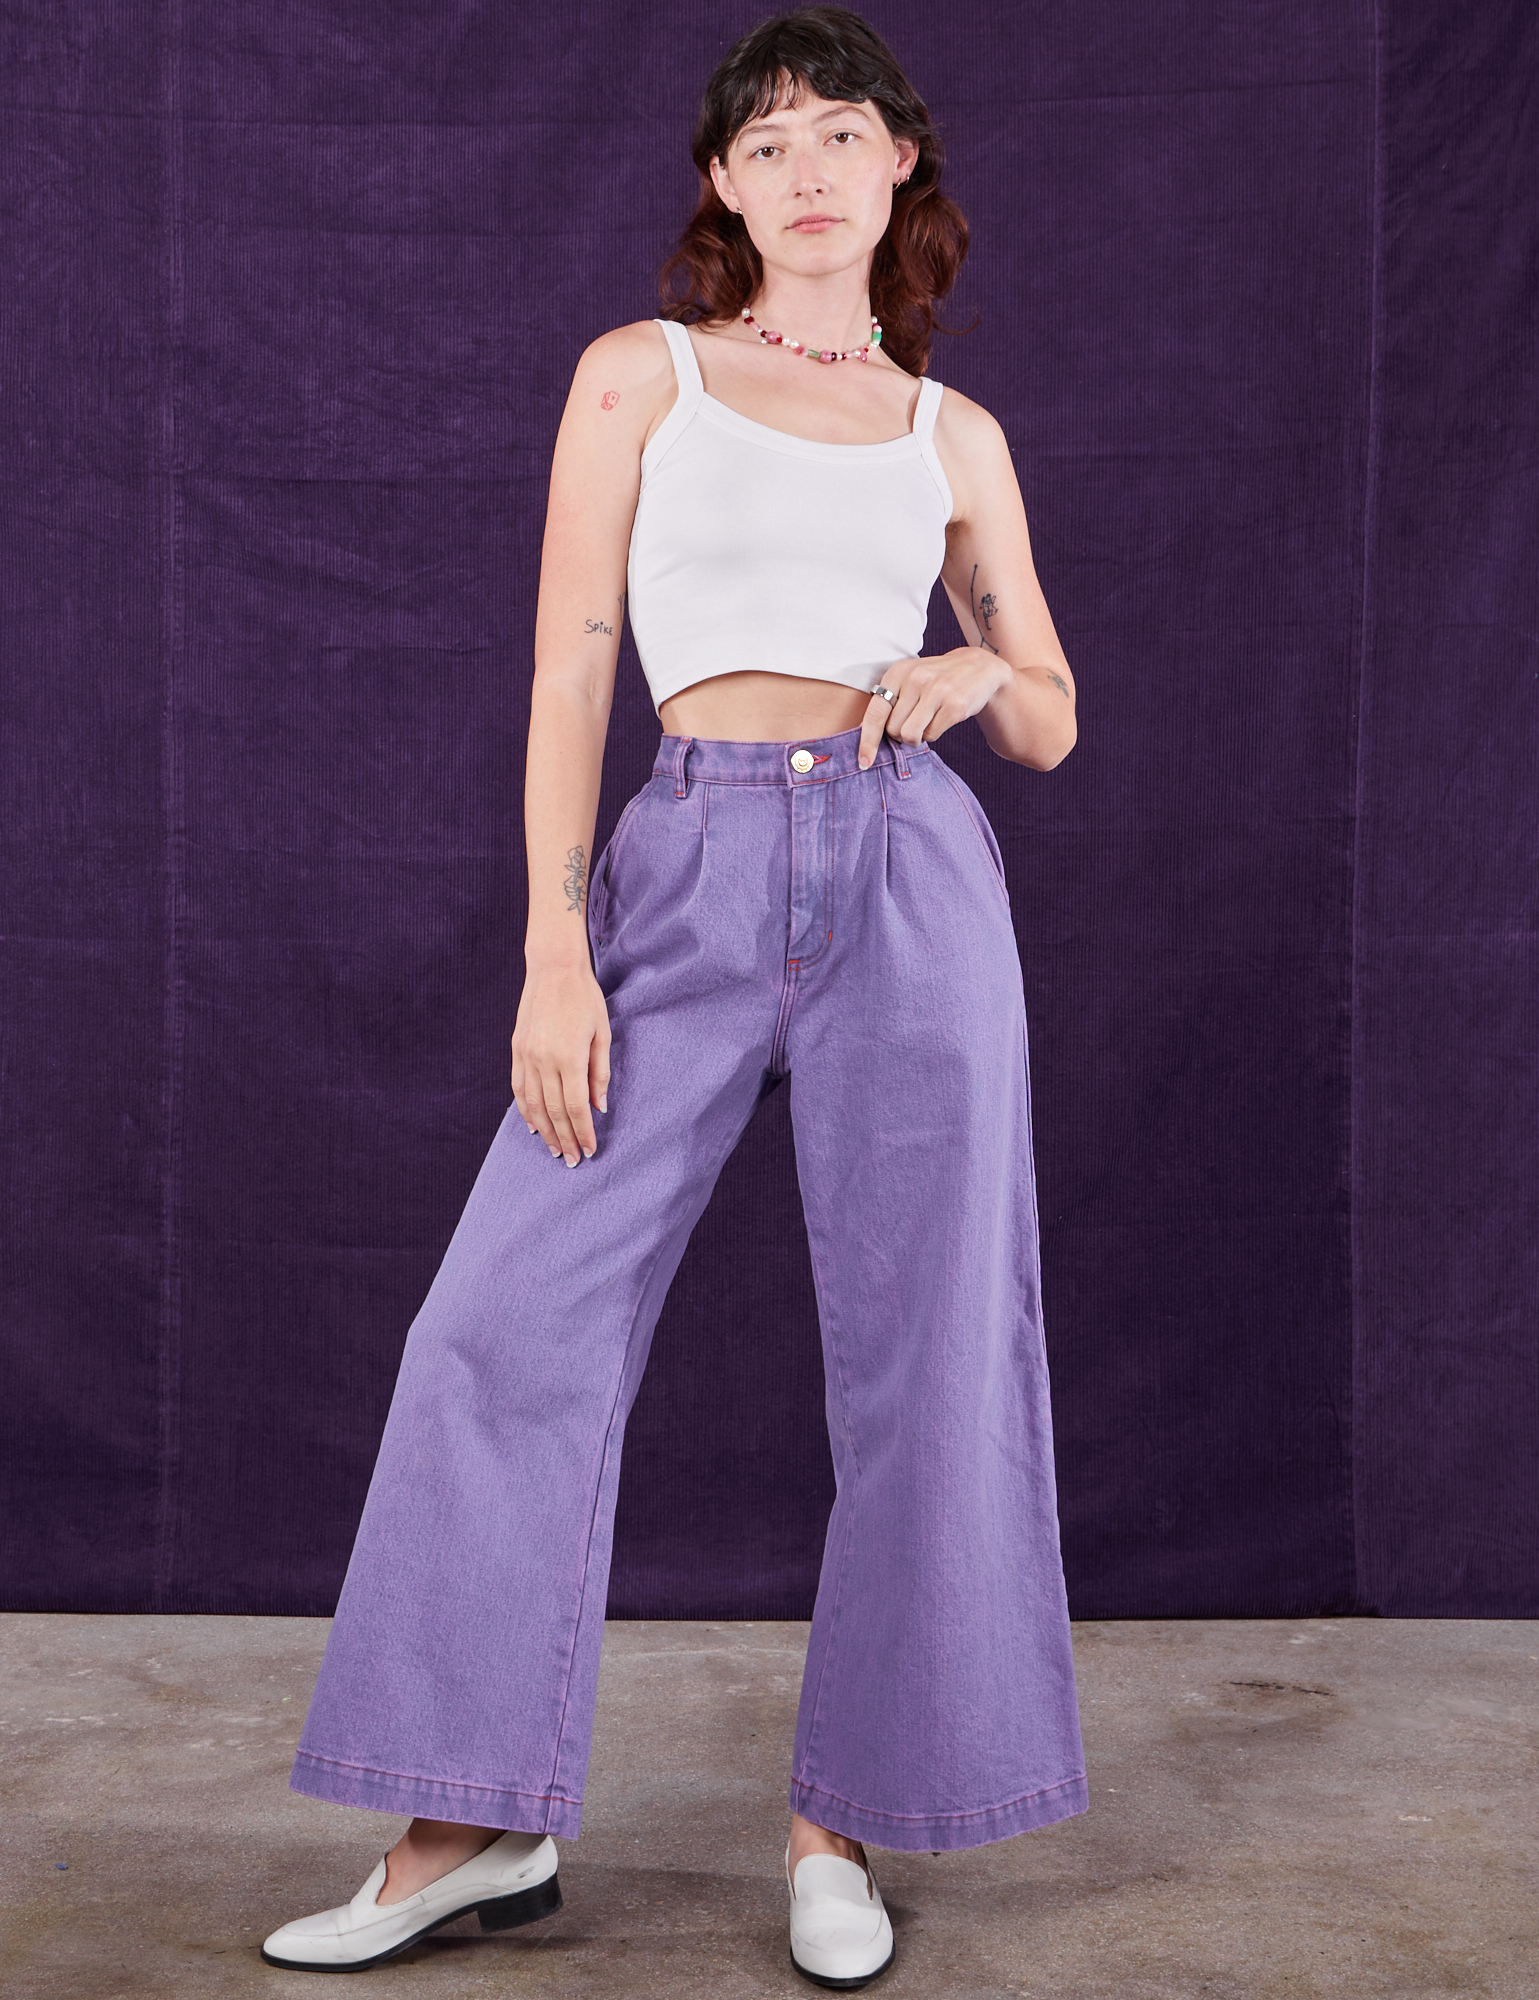 Alex is 5'8" and wearing XXS Overdyed Wide Leg Trousers in Faded Grape paired with Cropped Cami in vintage tee off-white